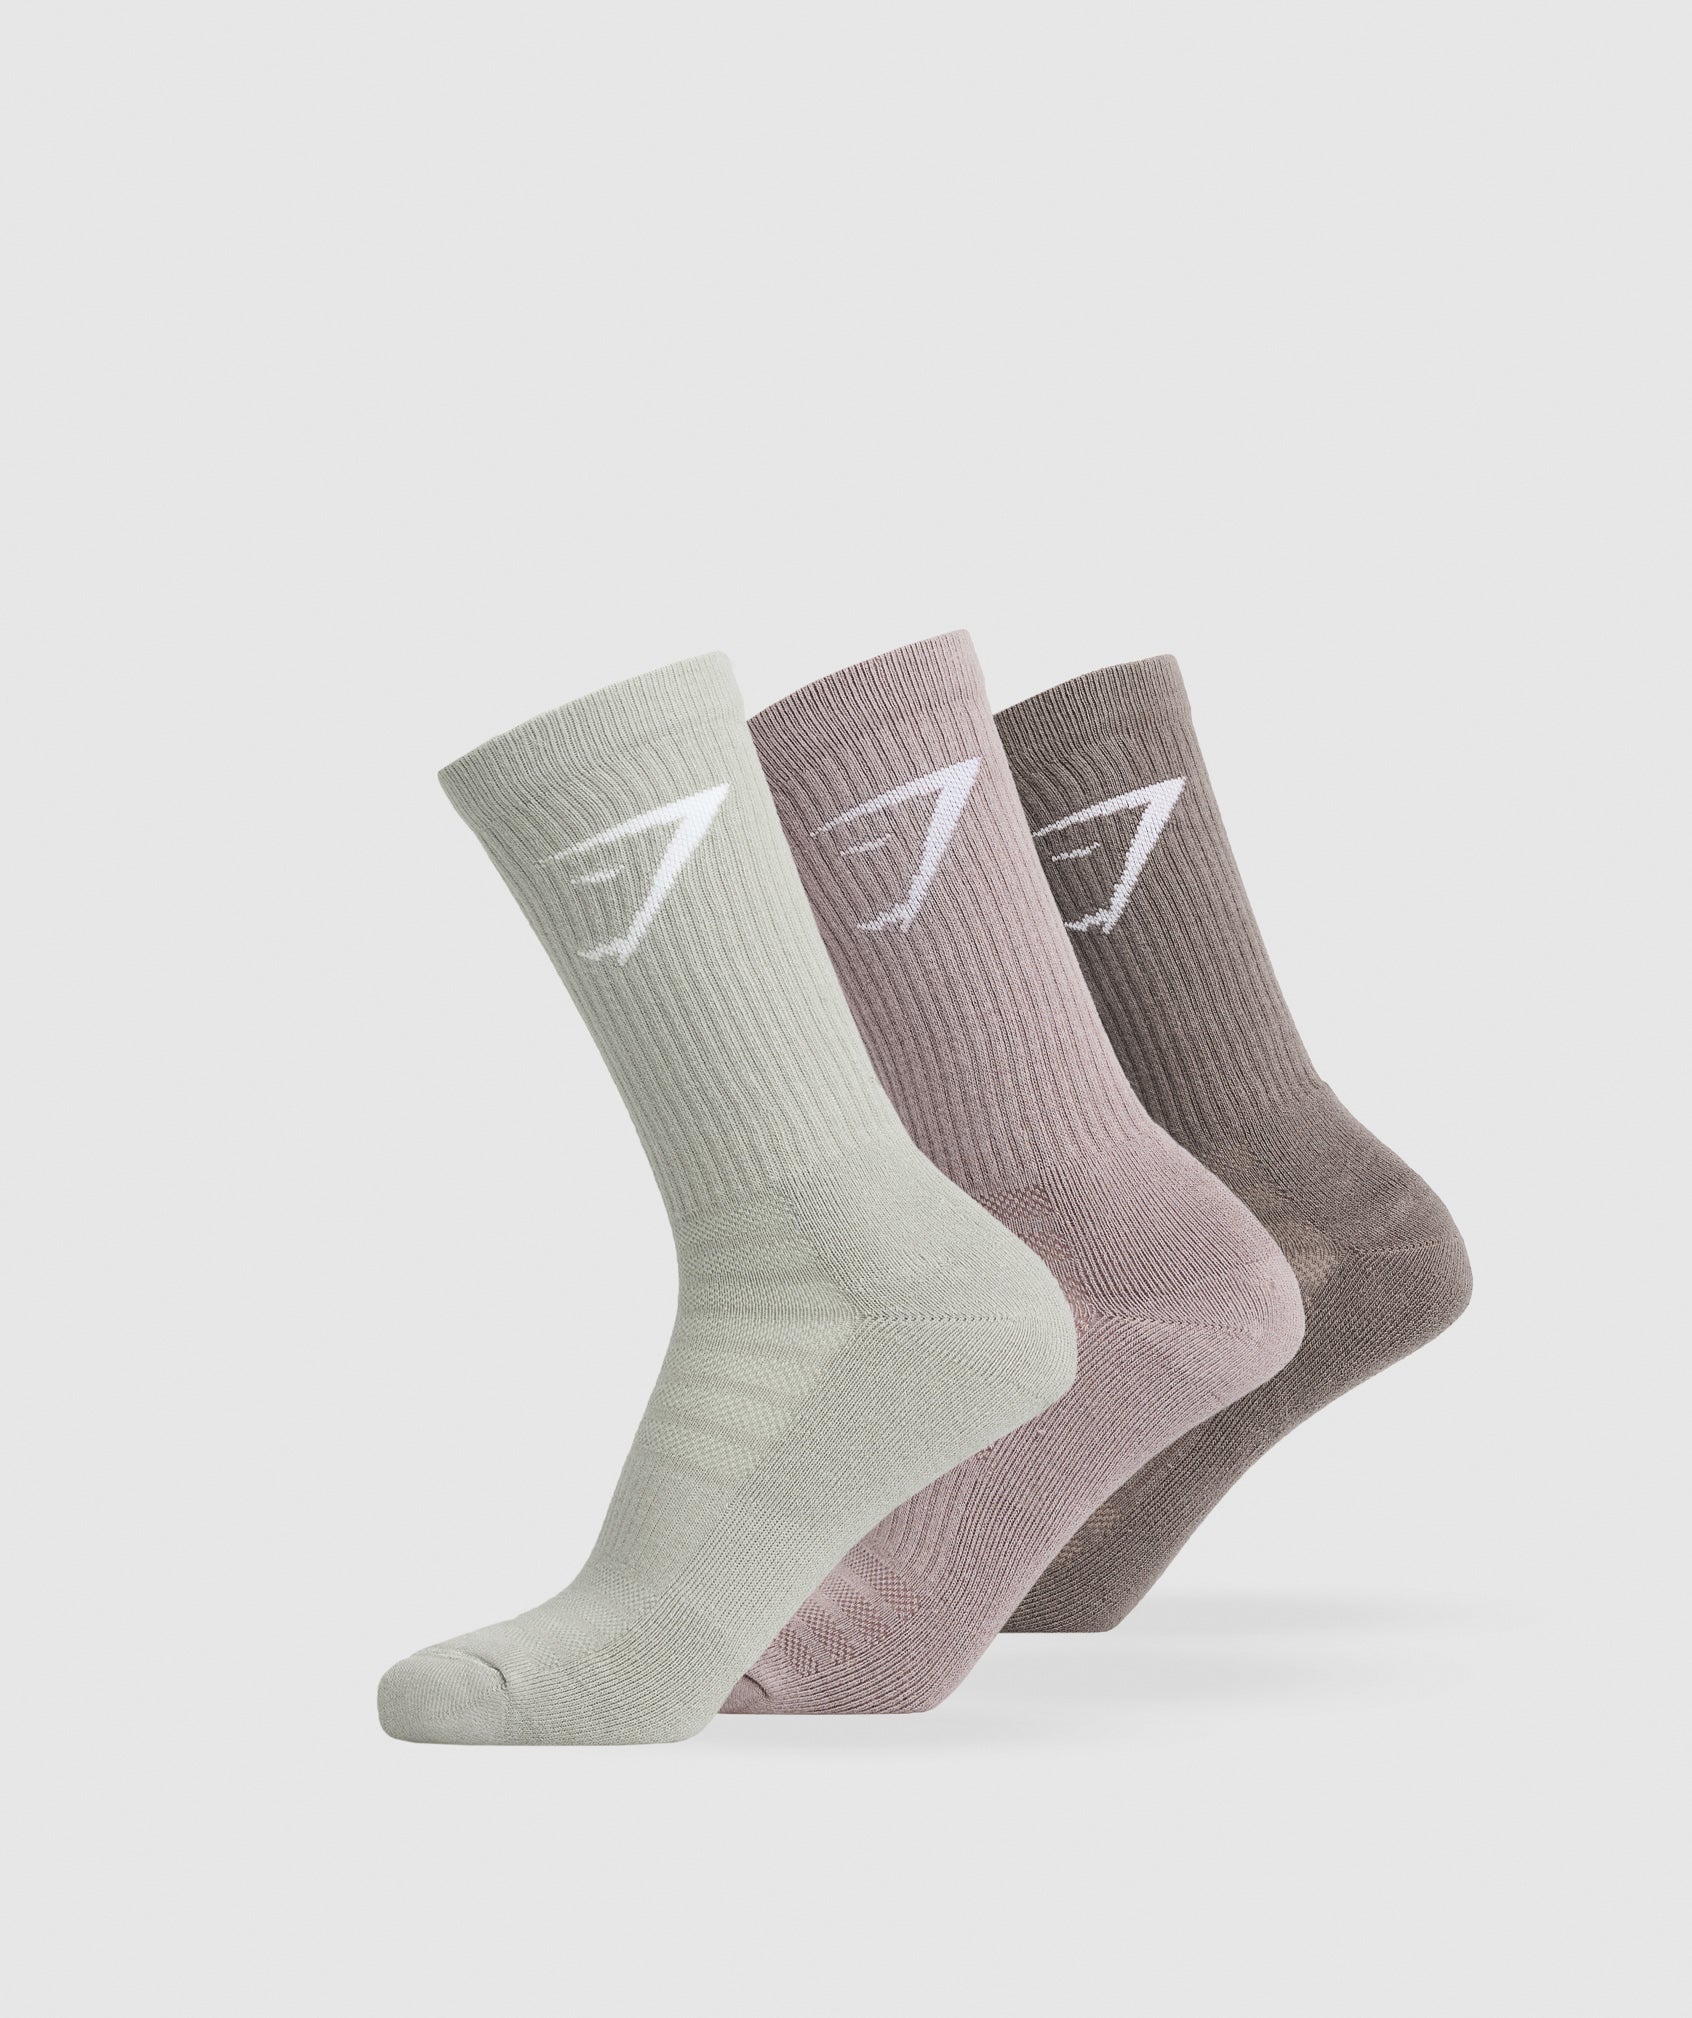 Crew Socks 3pk in Camo Brown/Washed Mauve/Stone Grey is out of stock